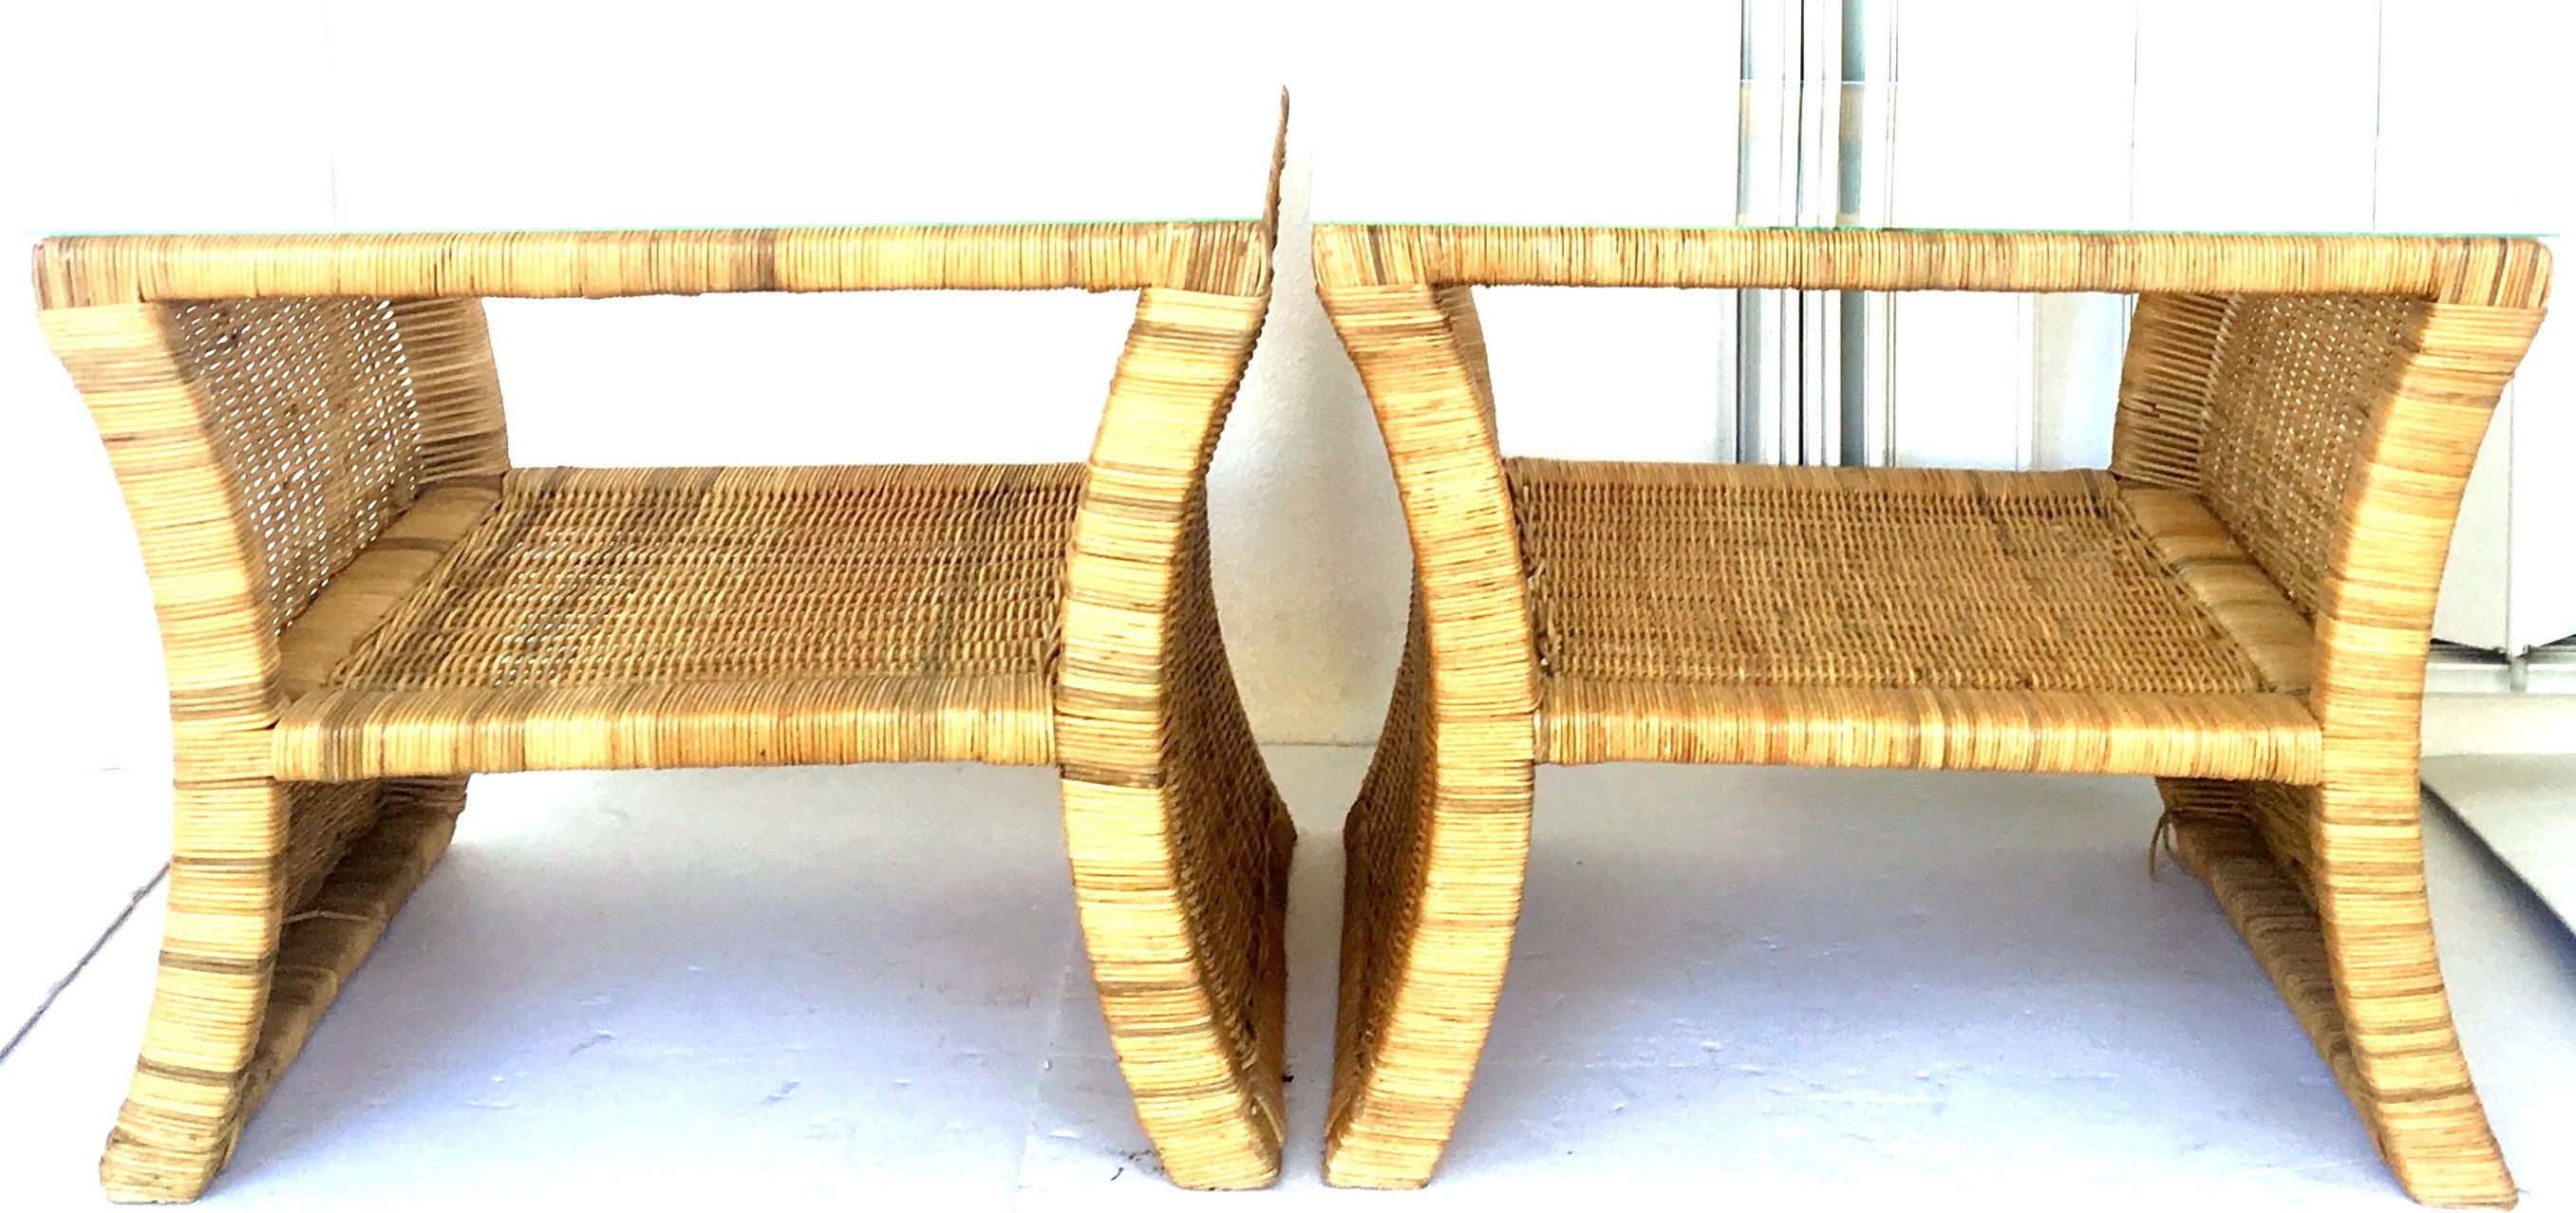 20th Century pair of woven rattan wicker bent and wrapped slanted side glass top side or end tables. These rare and unique tables with slanted sides feature a single open storage shelf and new glass tops that are not attached.
Glass tops have been